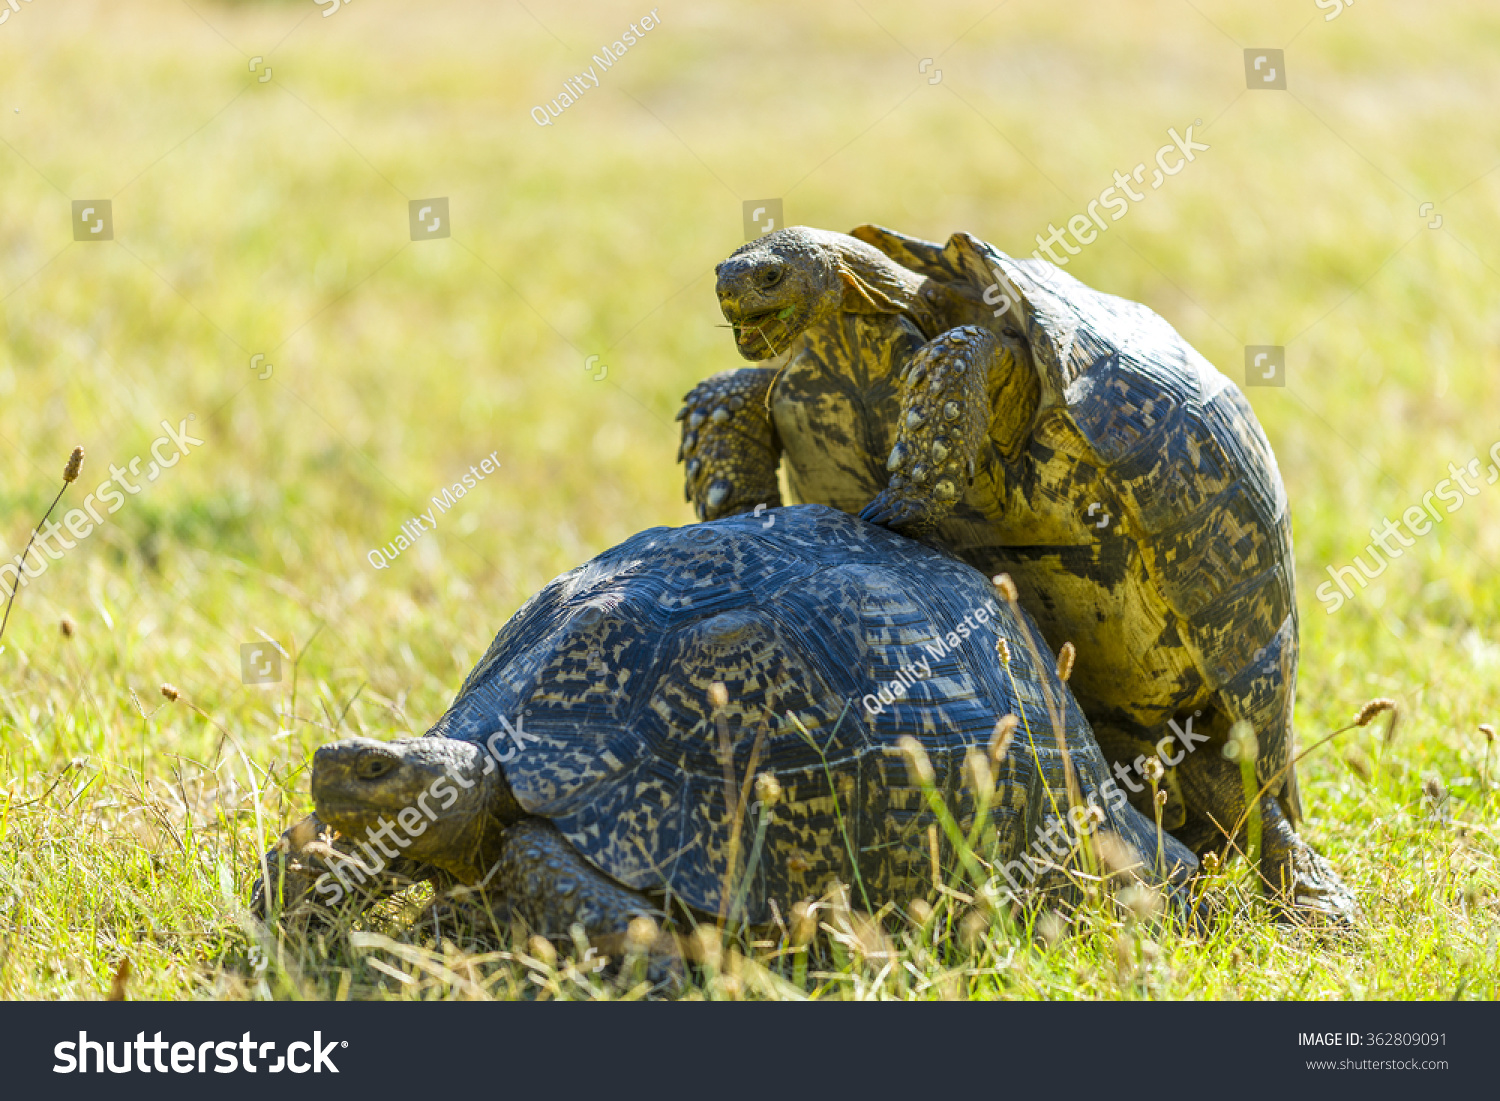 Picture Of A Male African Spur Tortoises Penis 120